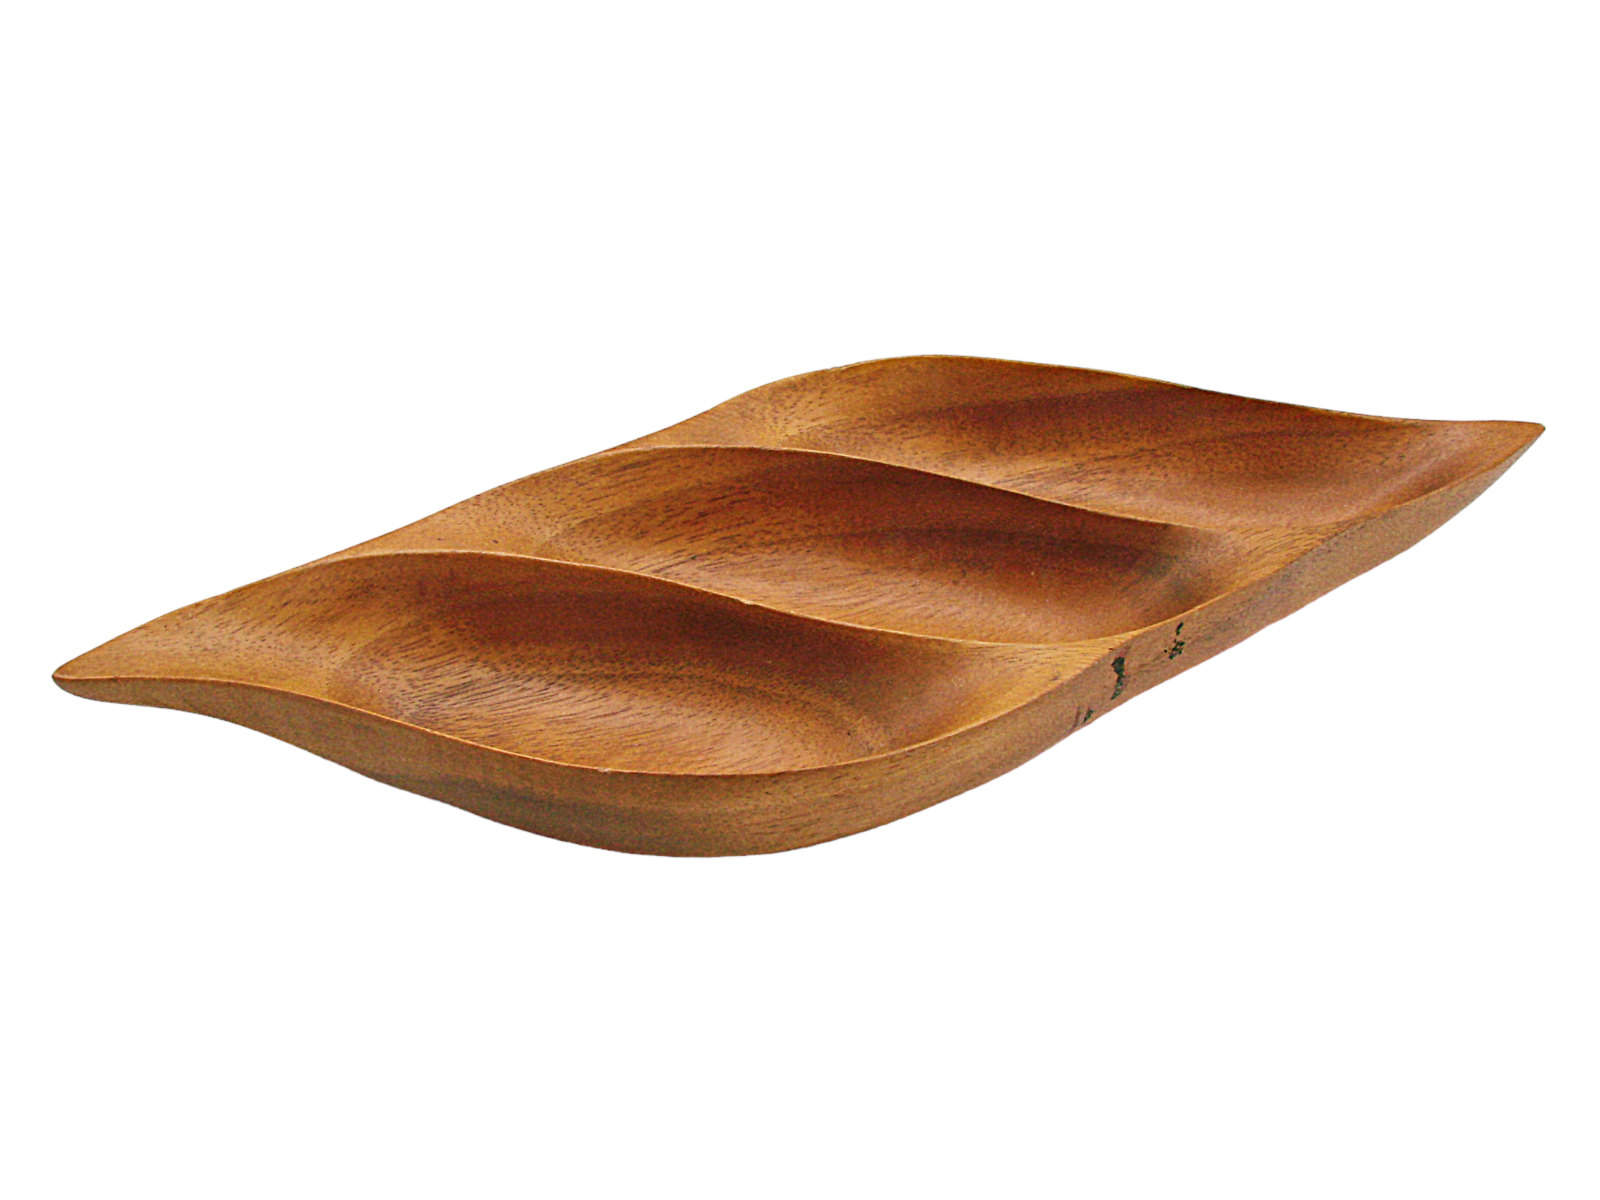 60s Blair Hawaii Monkey Pod Wood Tray Signed Divided Leaf Party Nuts Dish Snacks - $44.32